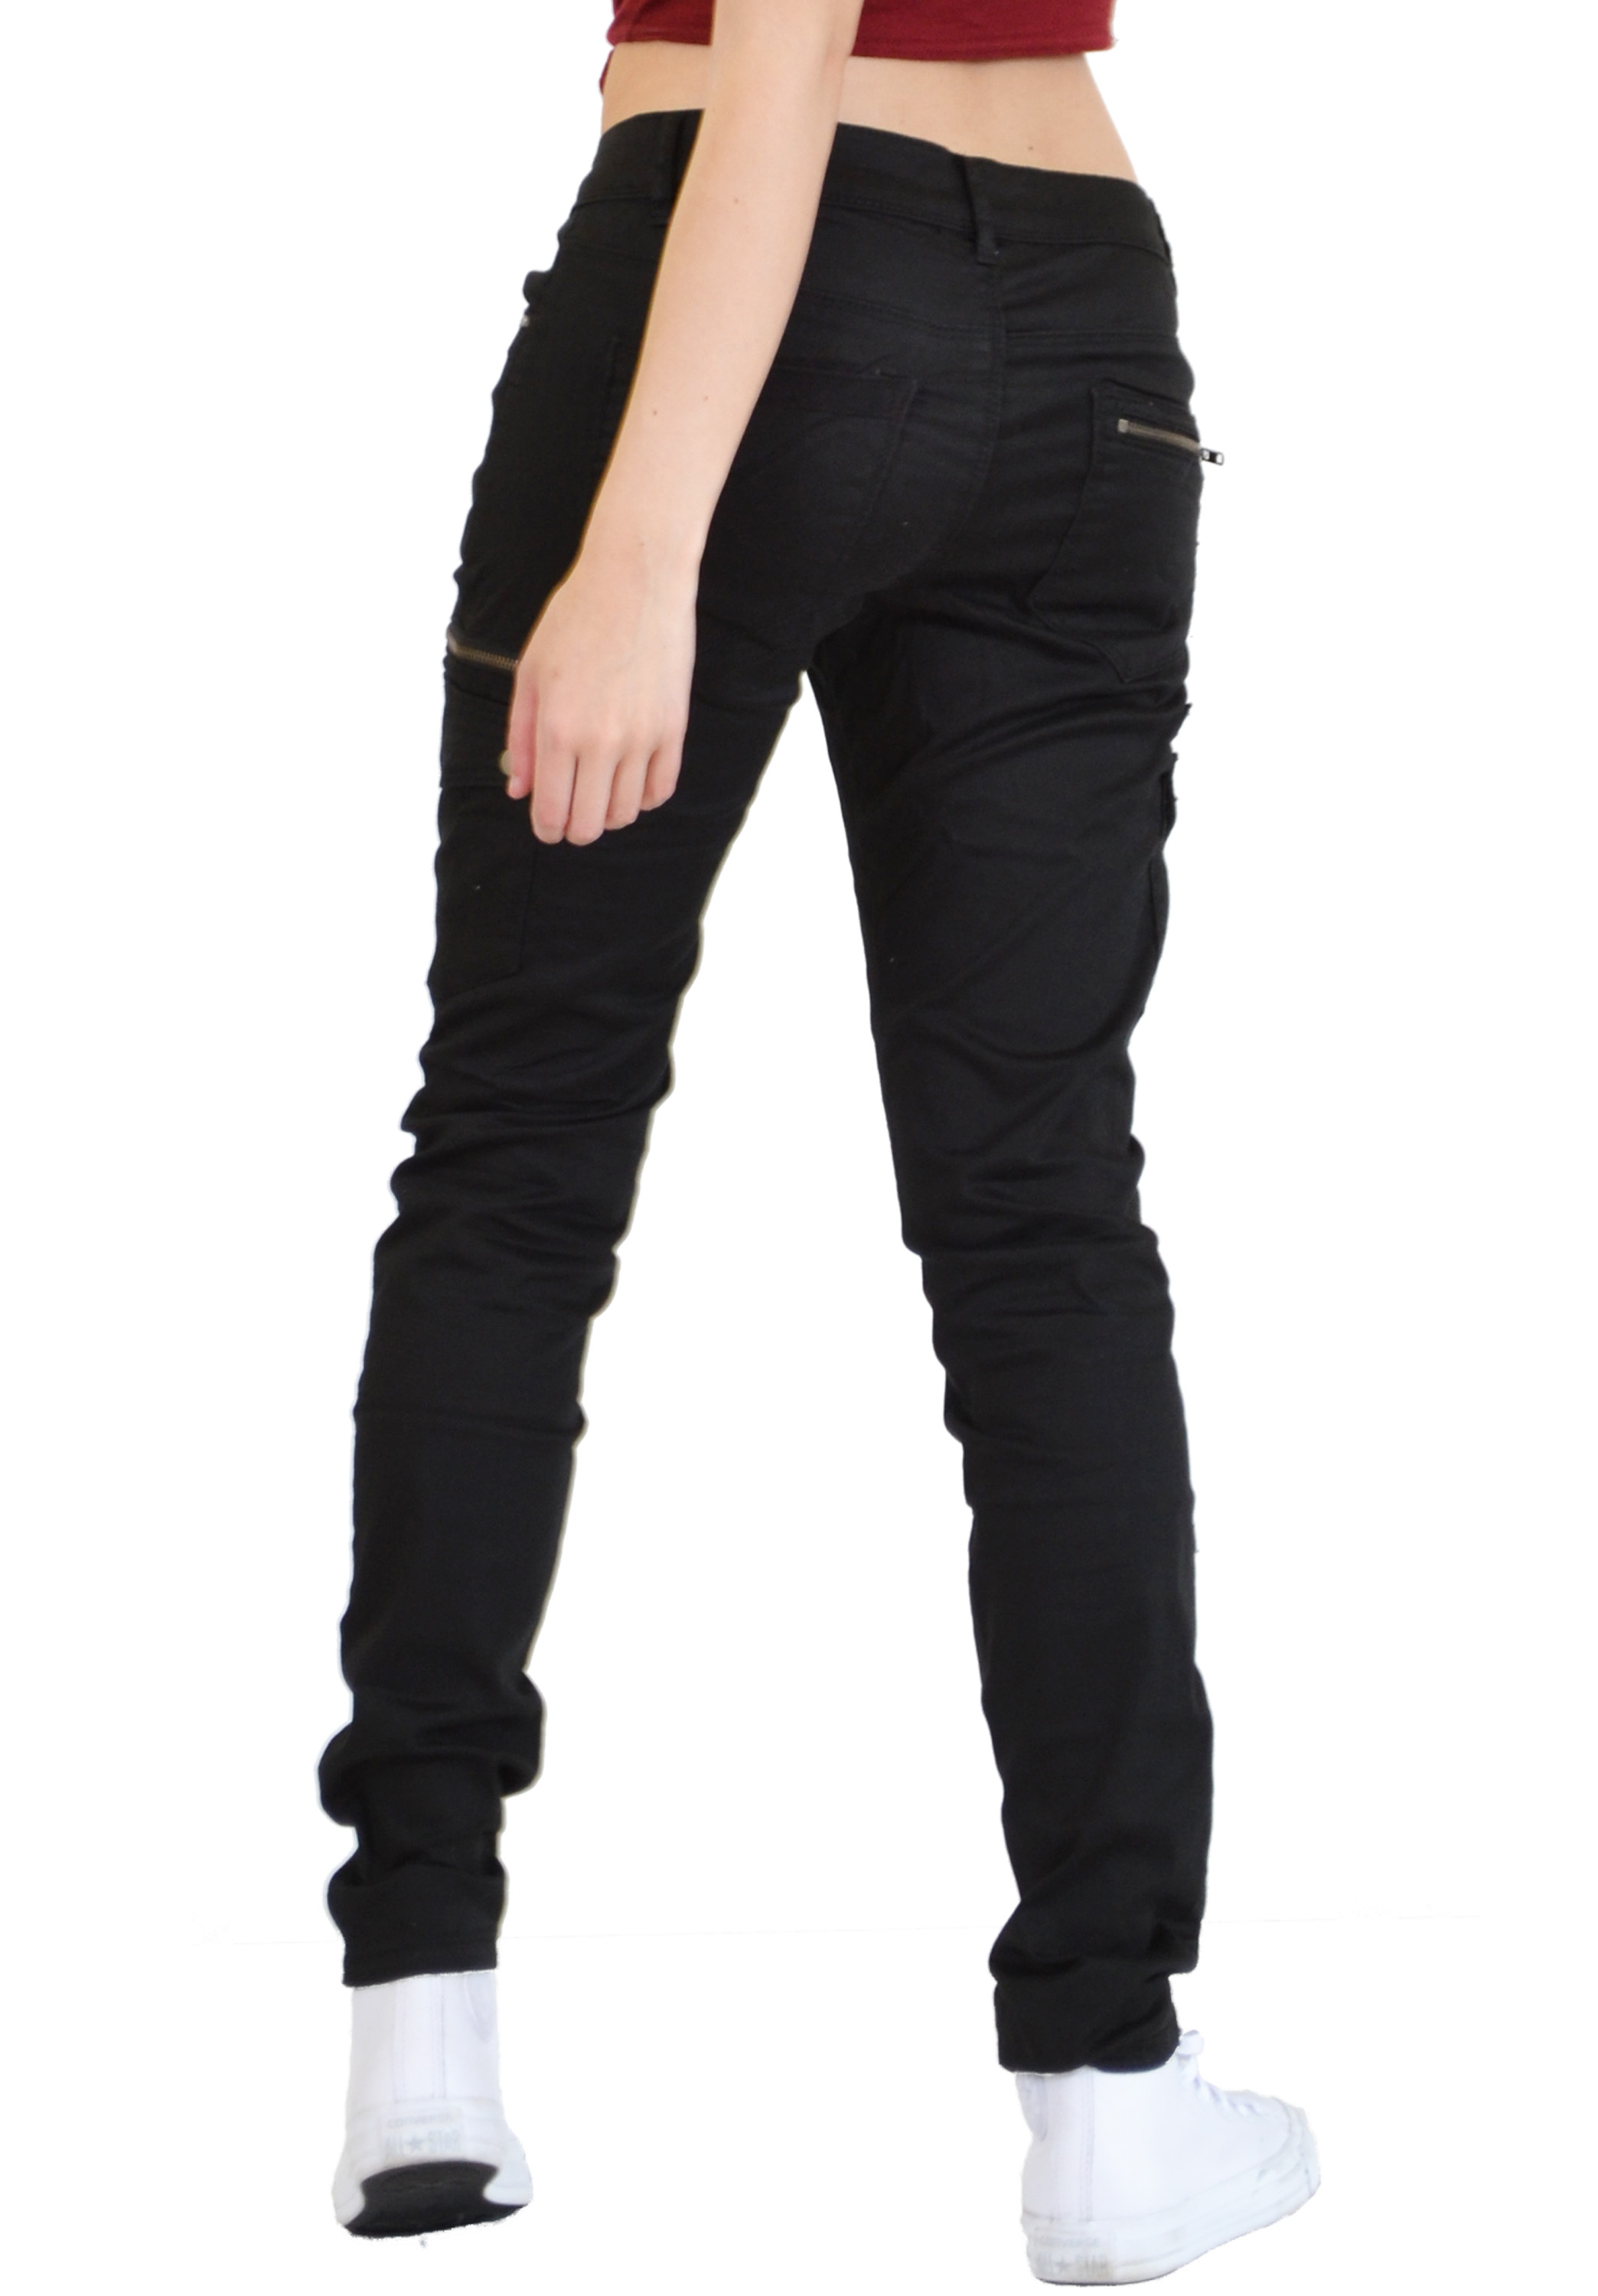 New Ladies Womens Slim Fitted Stretch Combat Jeans Pants Skinny Cargo Trousers Ebay 